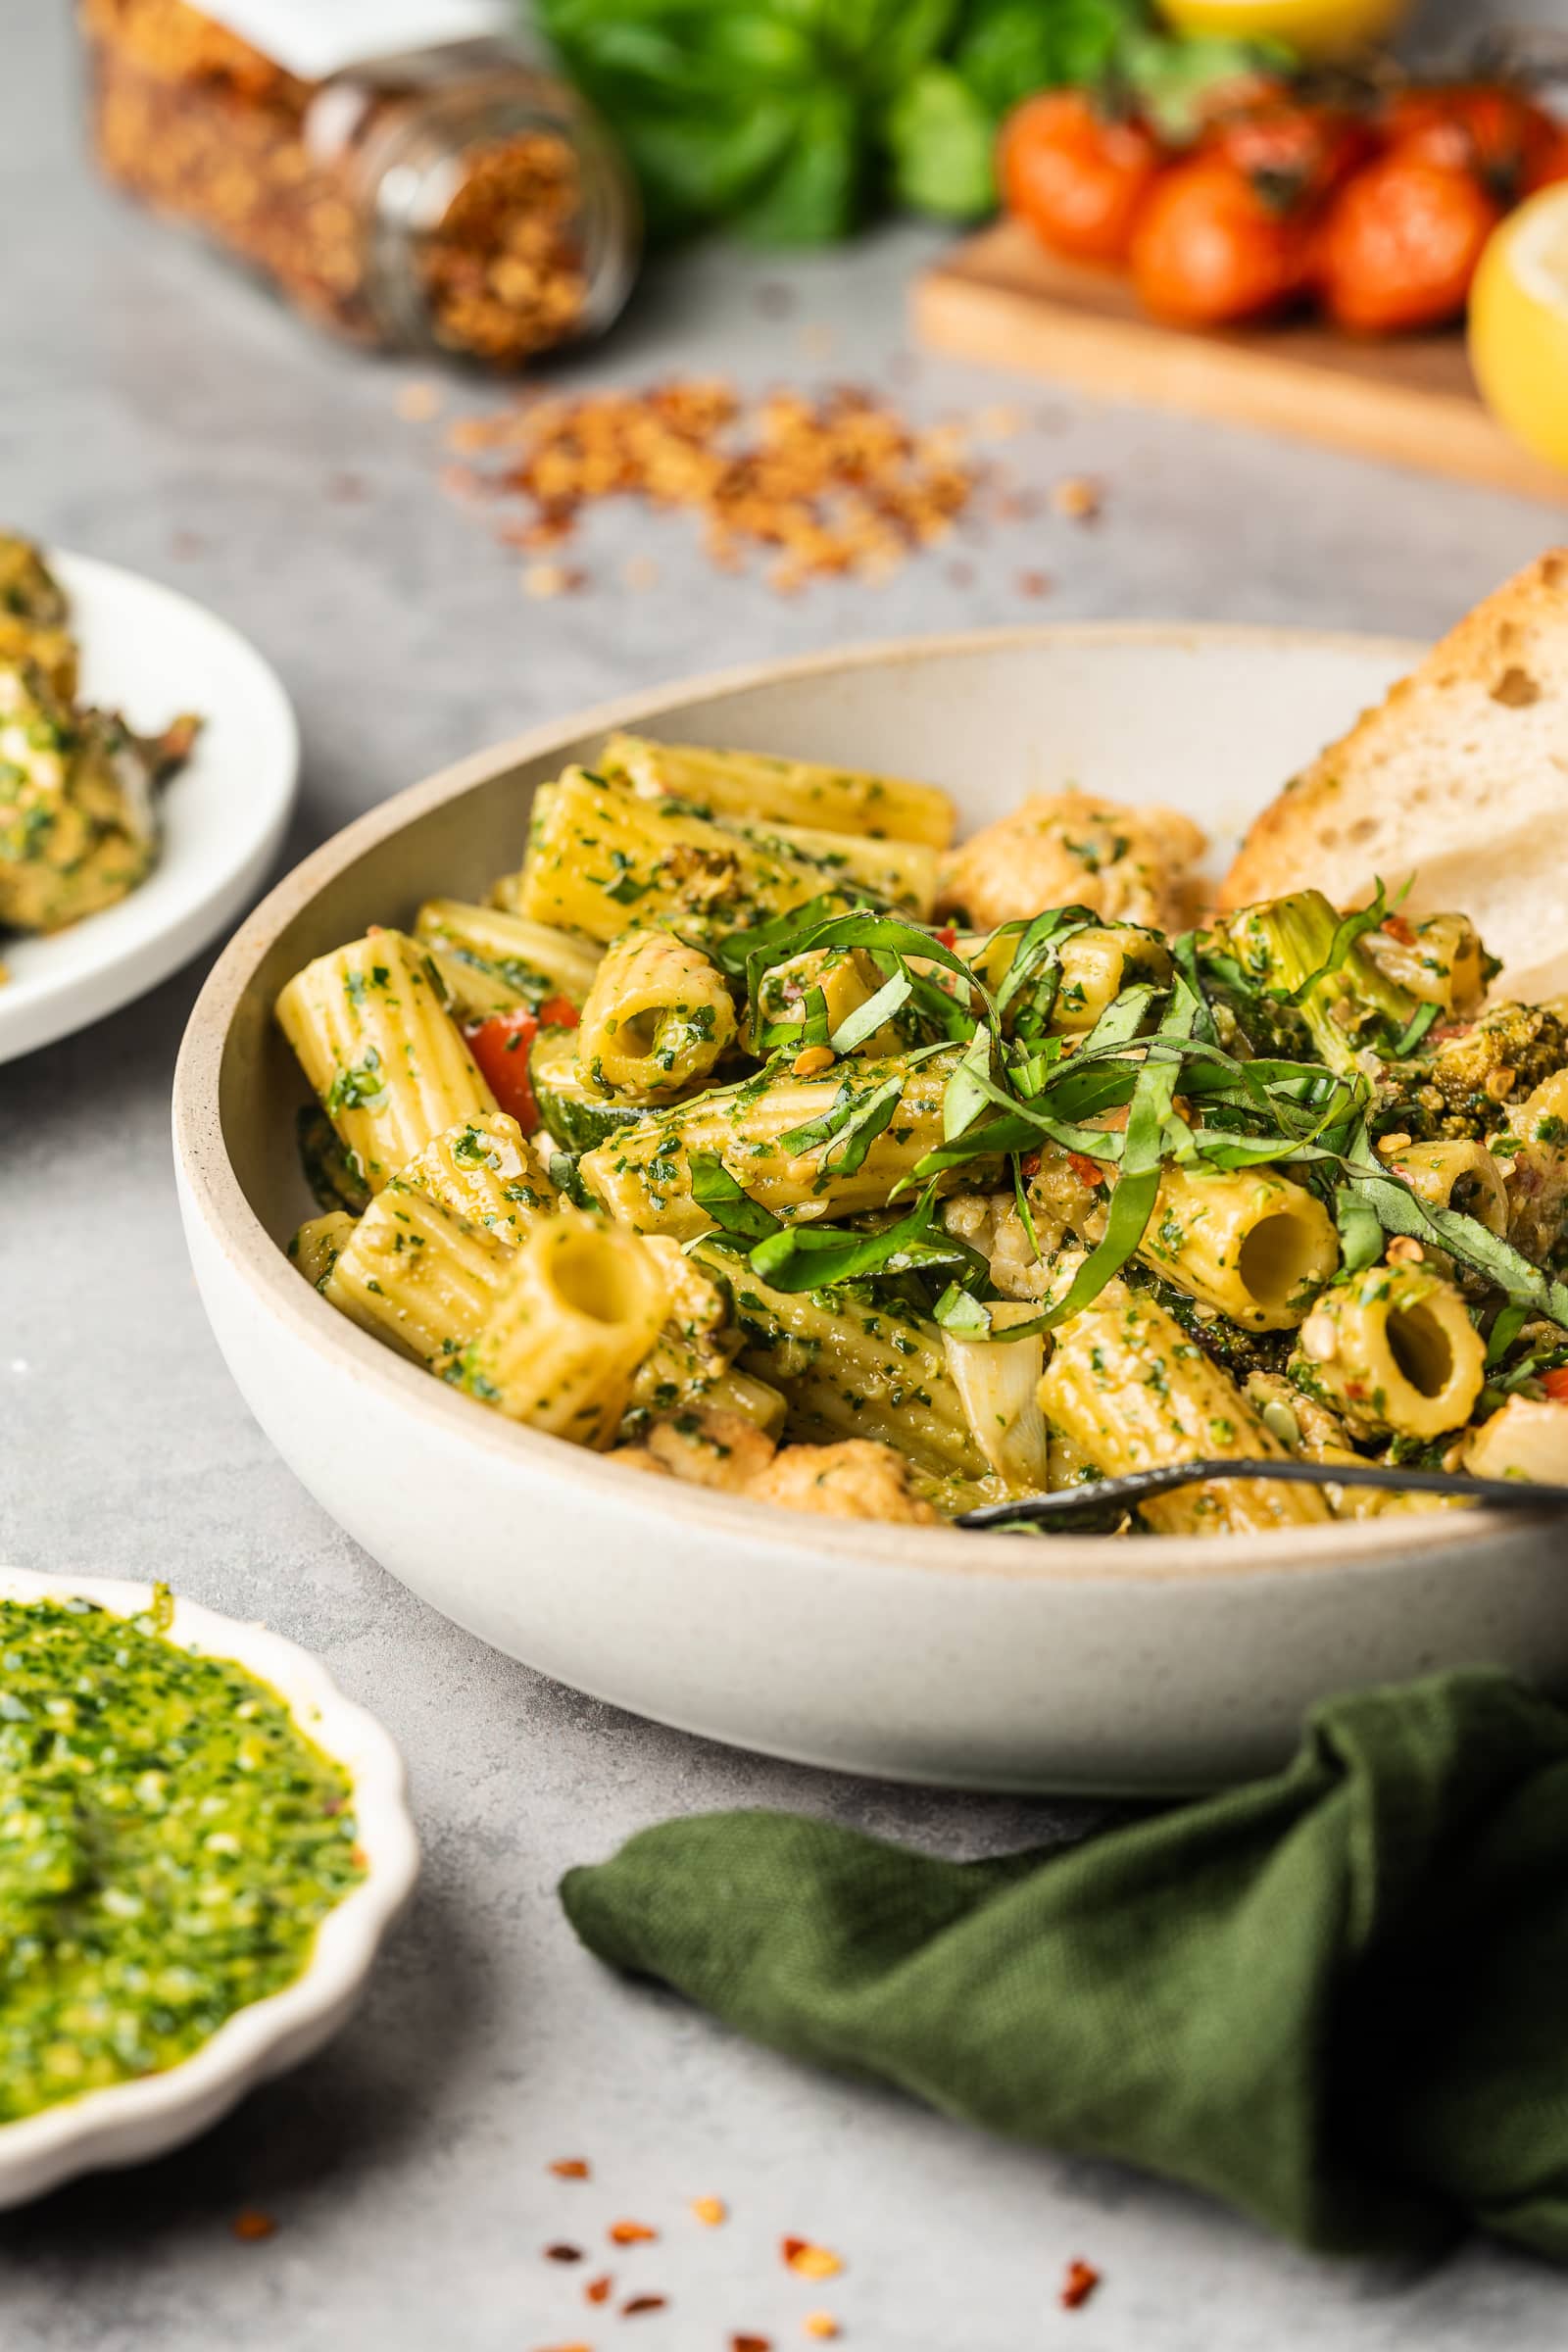 Pesto pasta in a serving dish with bread, roasted tomatoes, fresh basil, and red chili flakes.